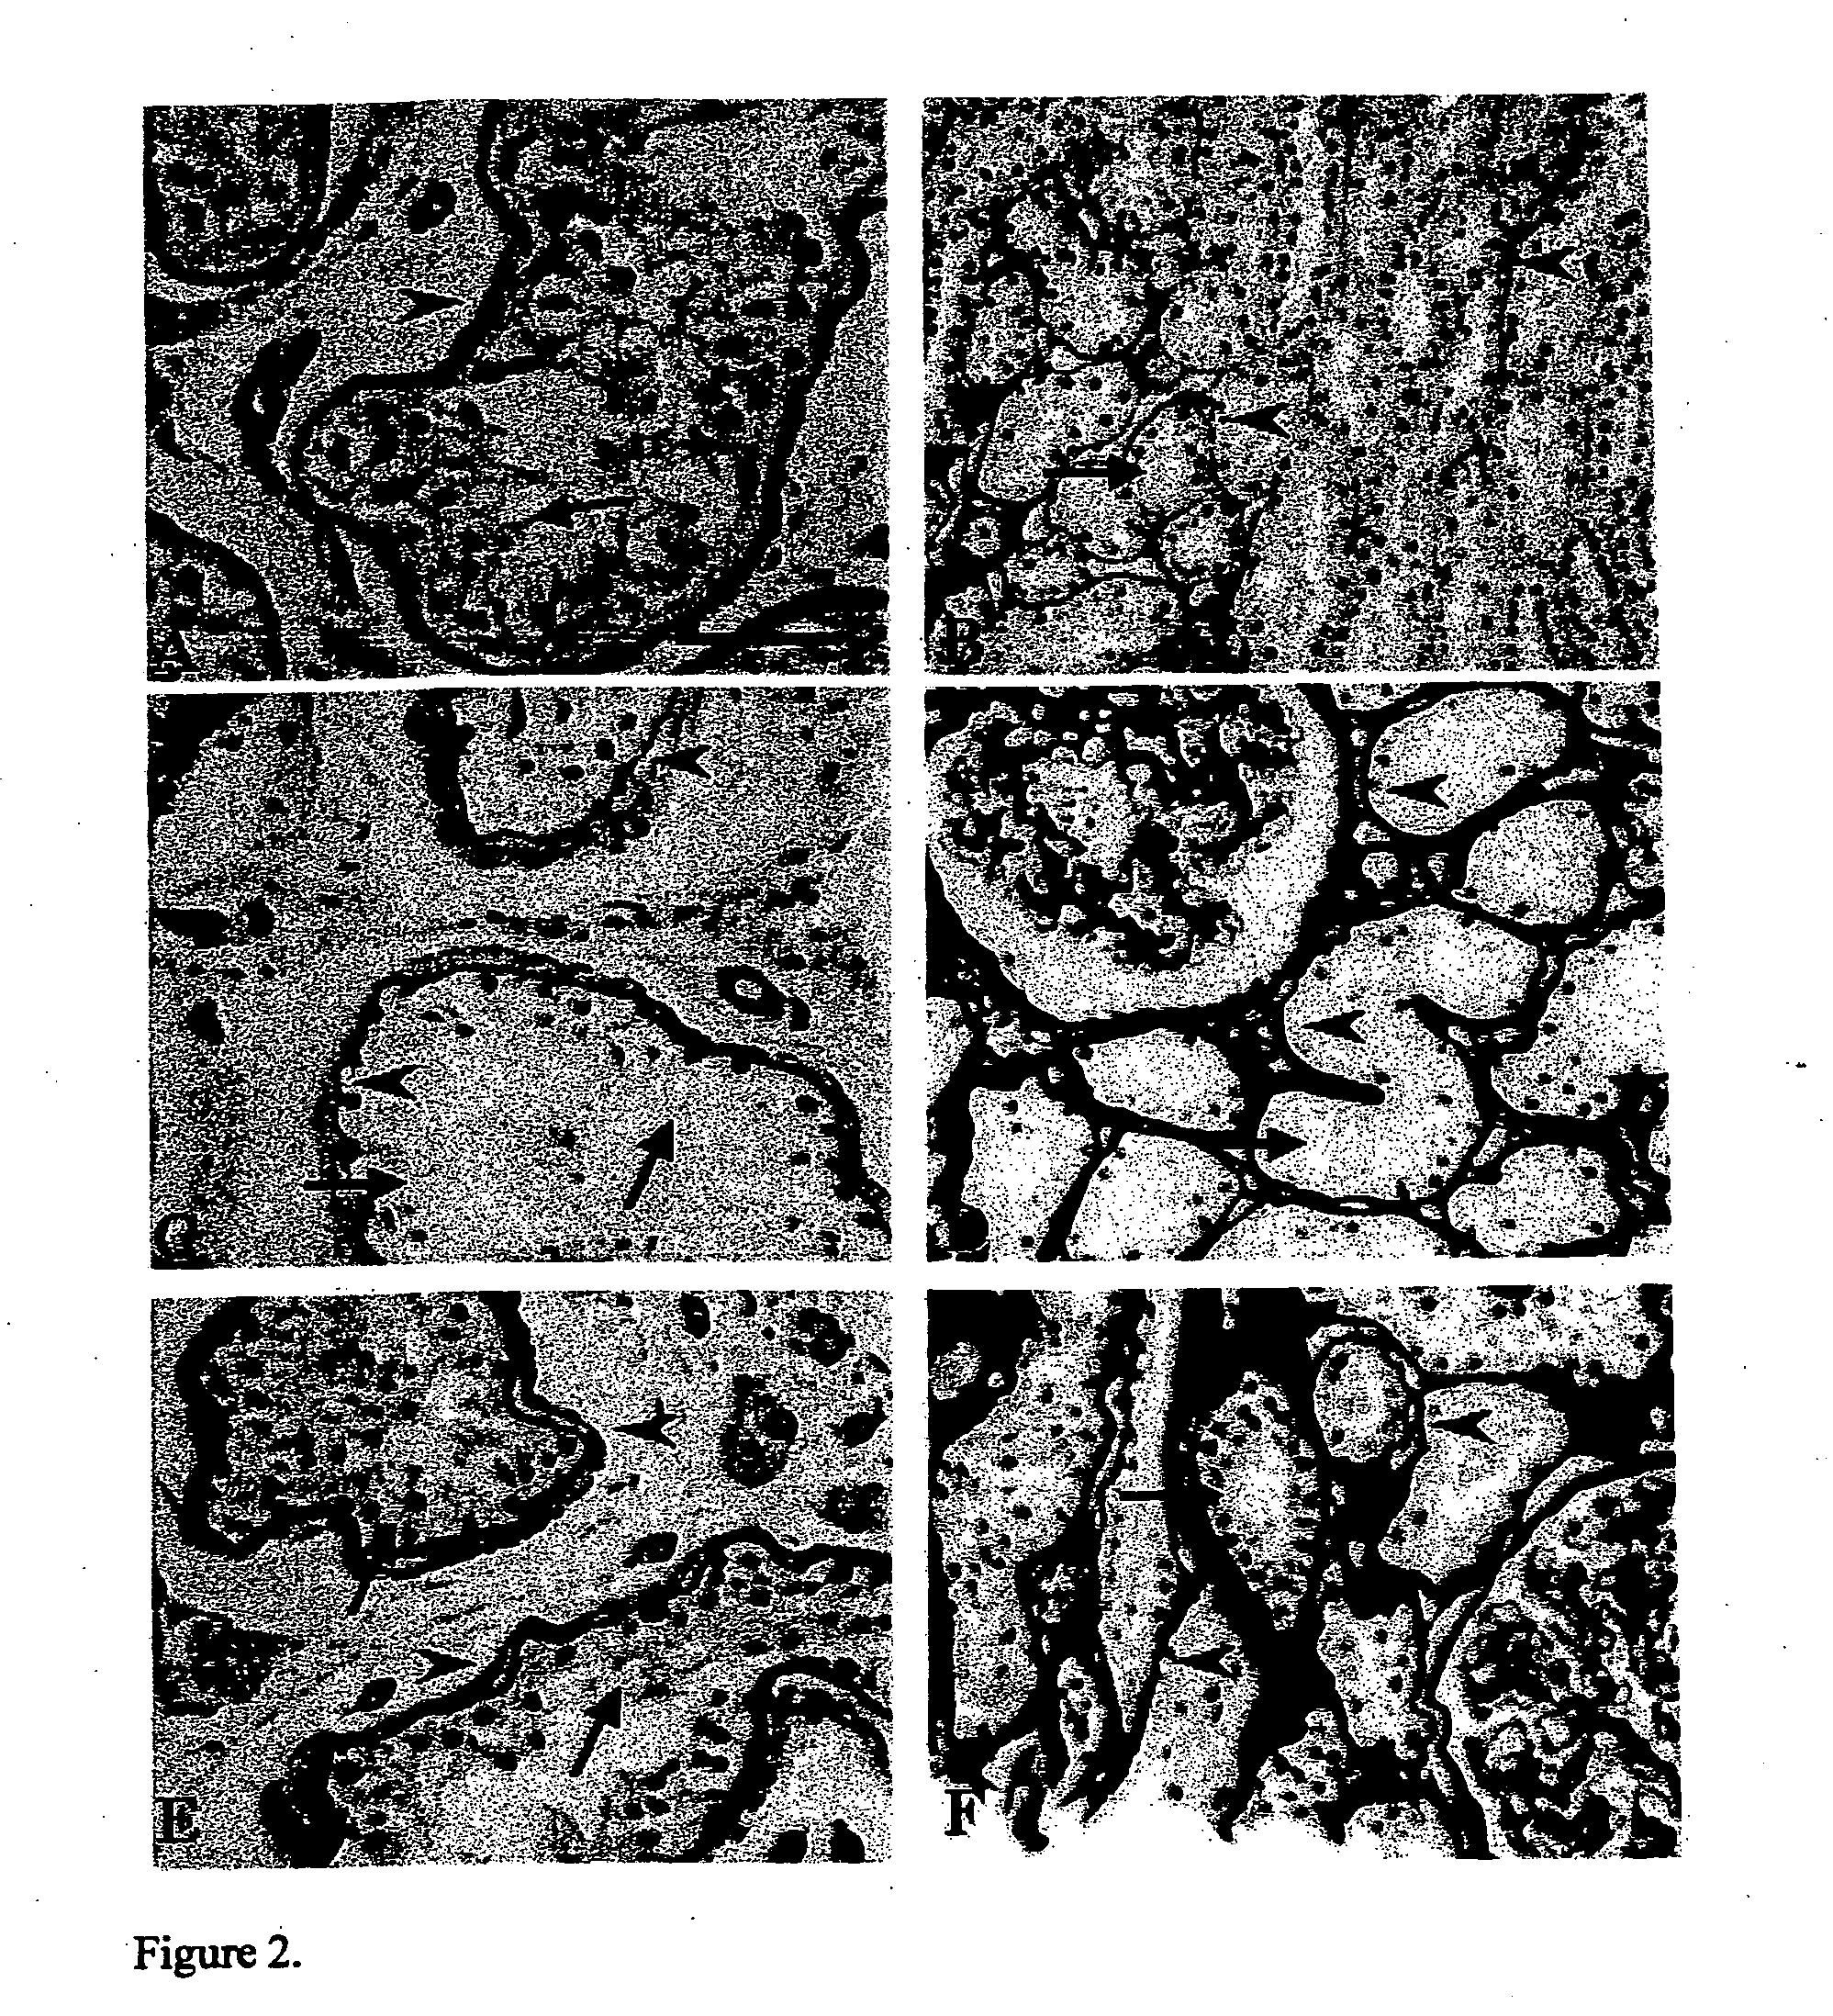 Method for immunohistochemical detection of collagen in a tissue sample